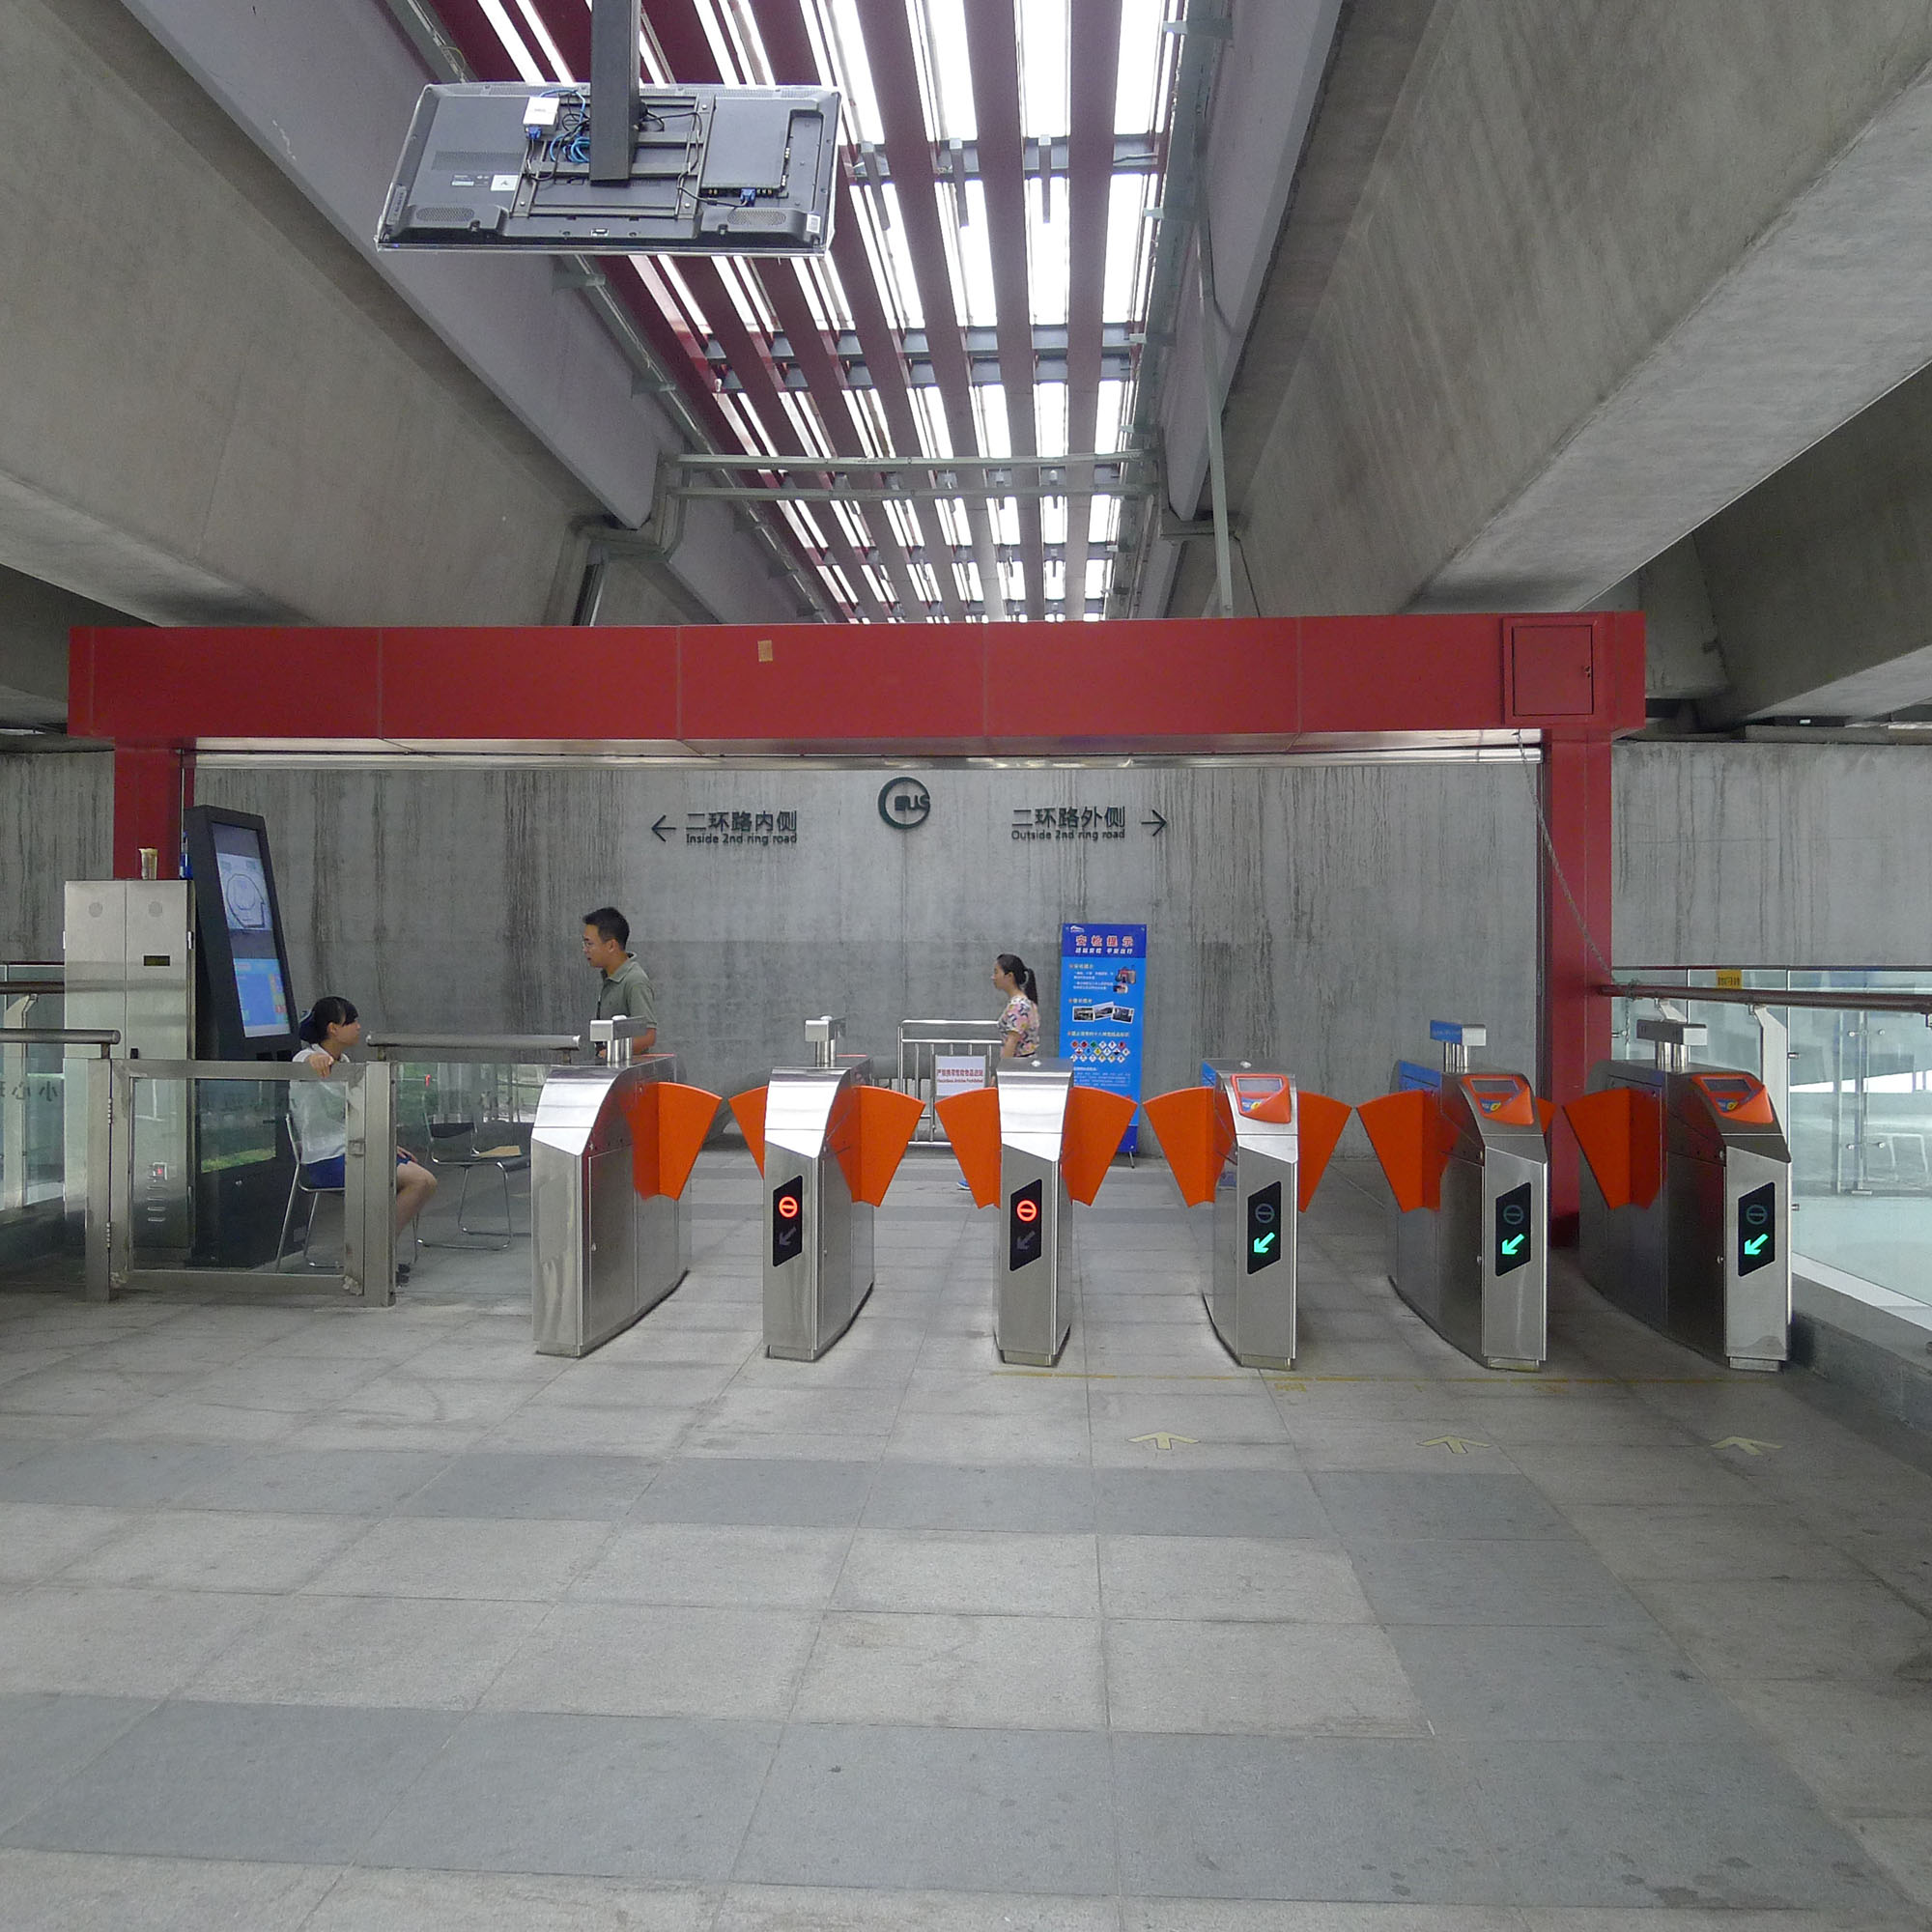 Fig. 18.5 The BRT system in Chengdu, China, utilizes wing gates to control access to the system.